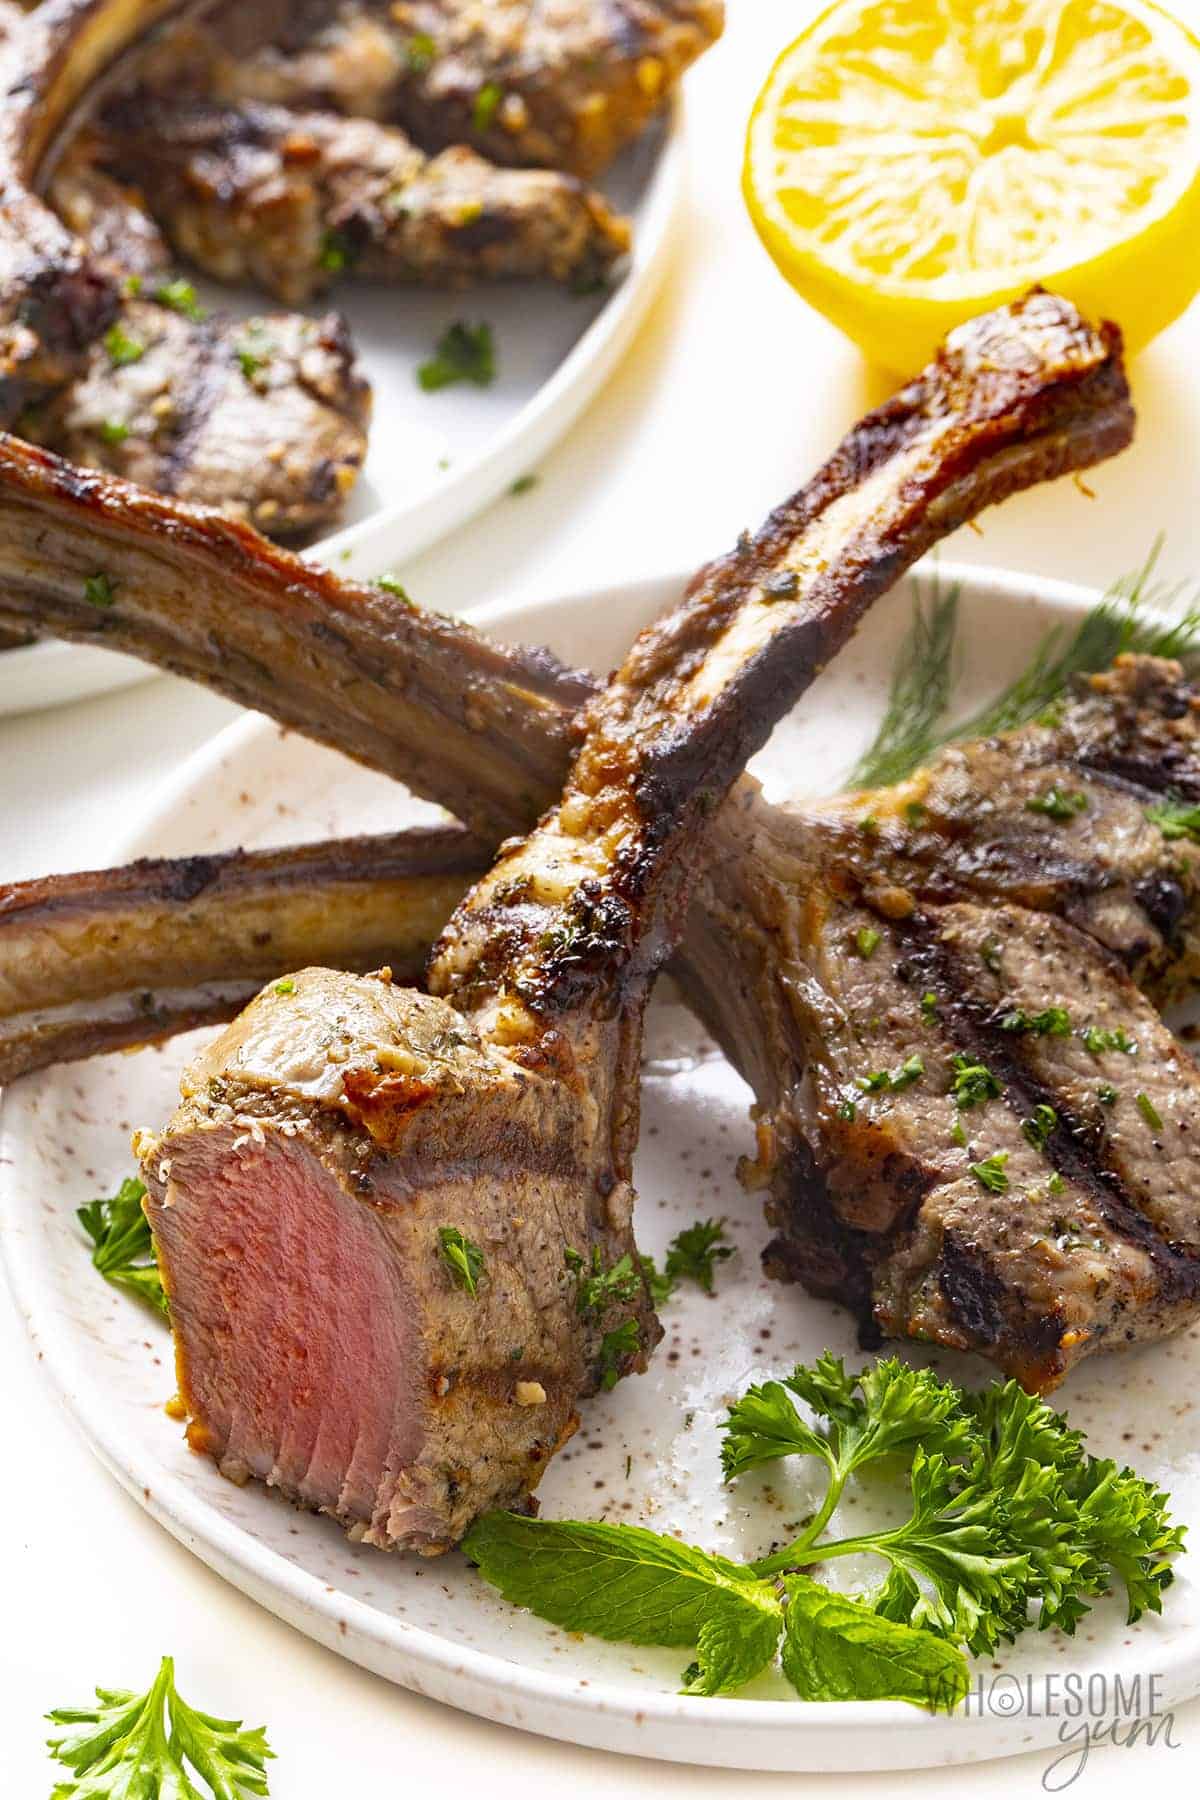 Plated lamb chops with one chop sliced.